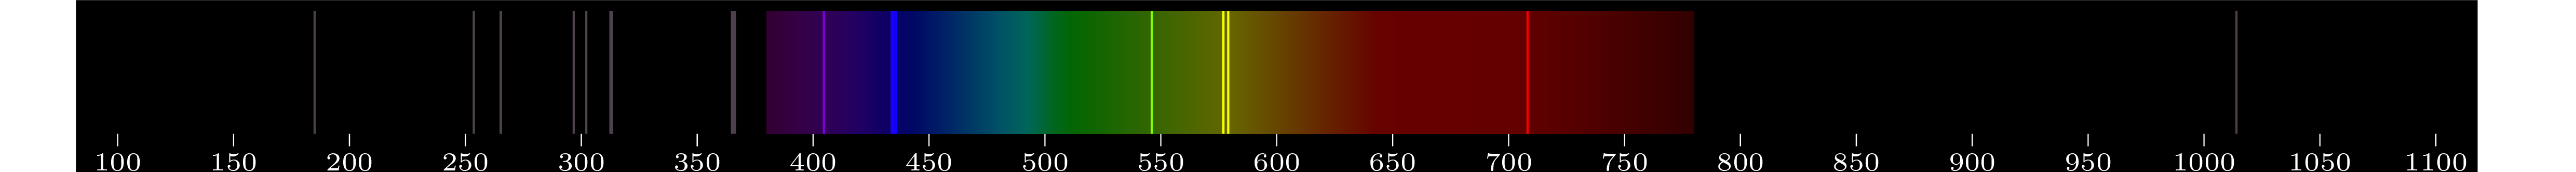 emmision spectra of element Hg